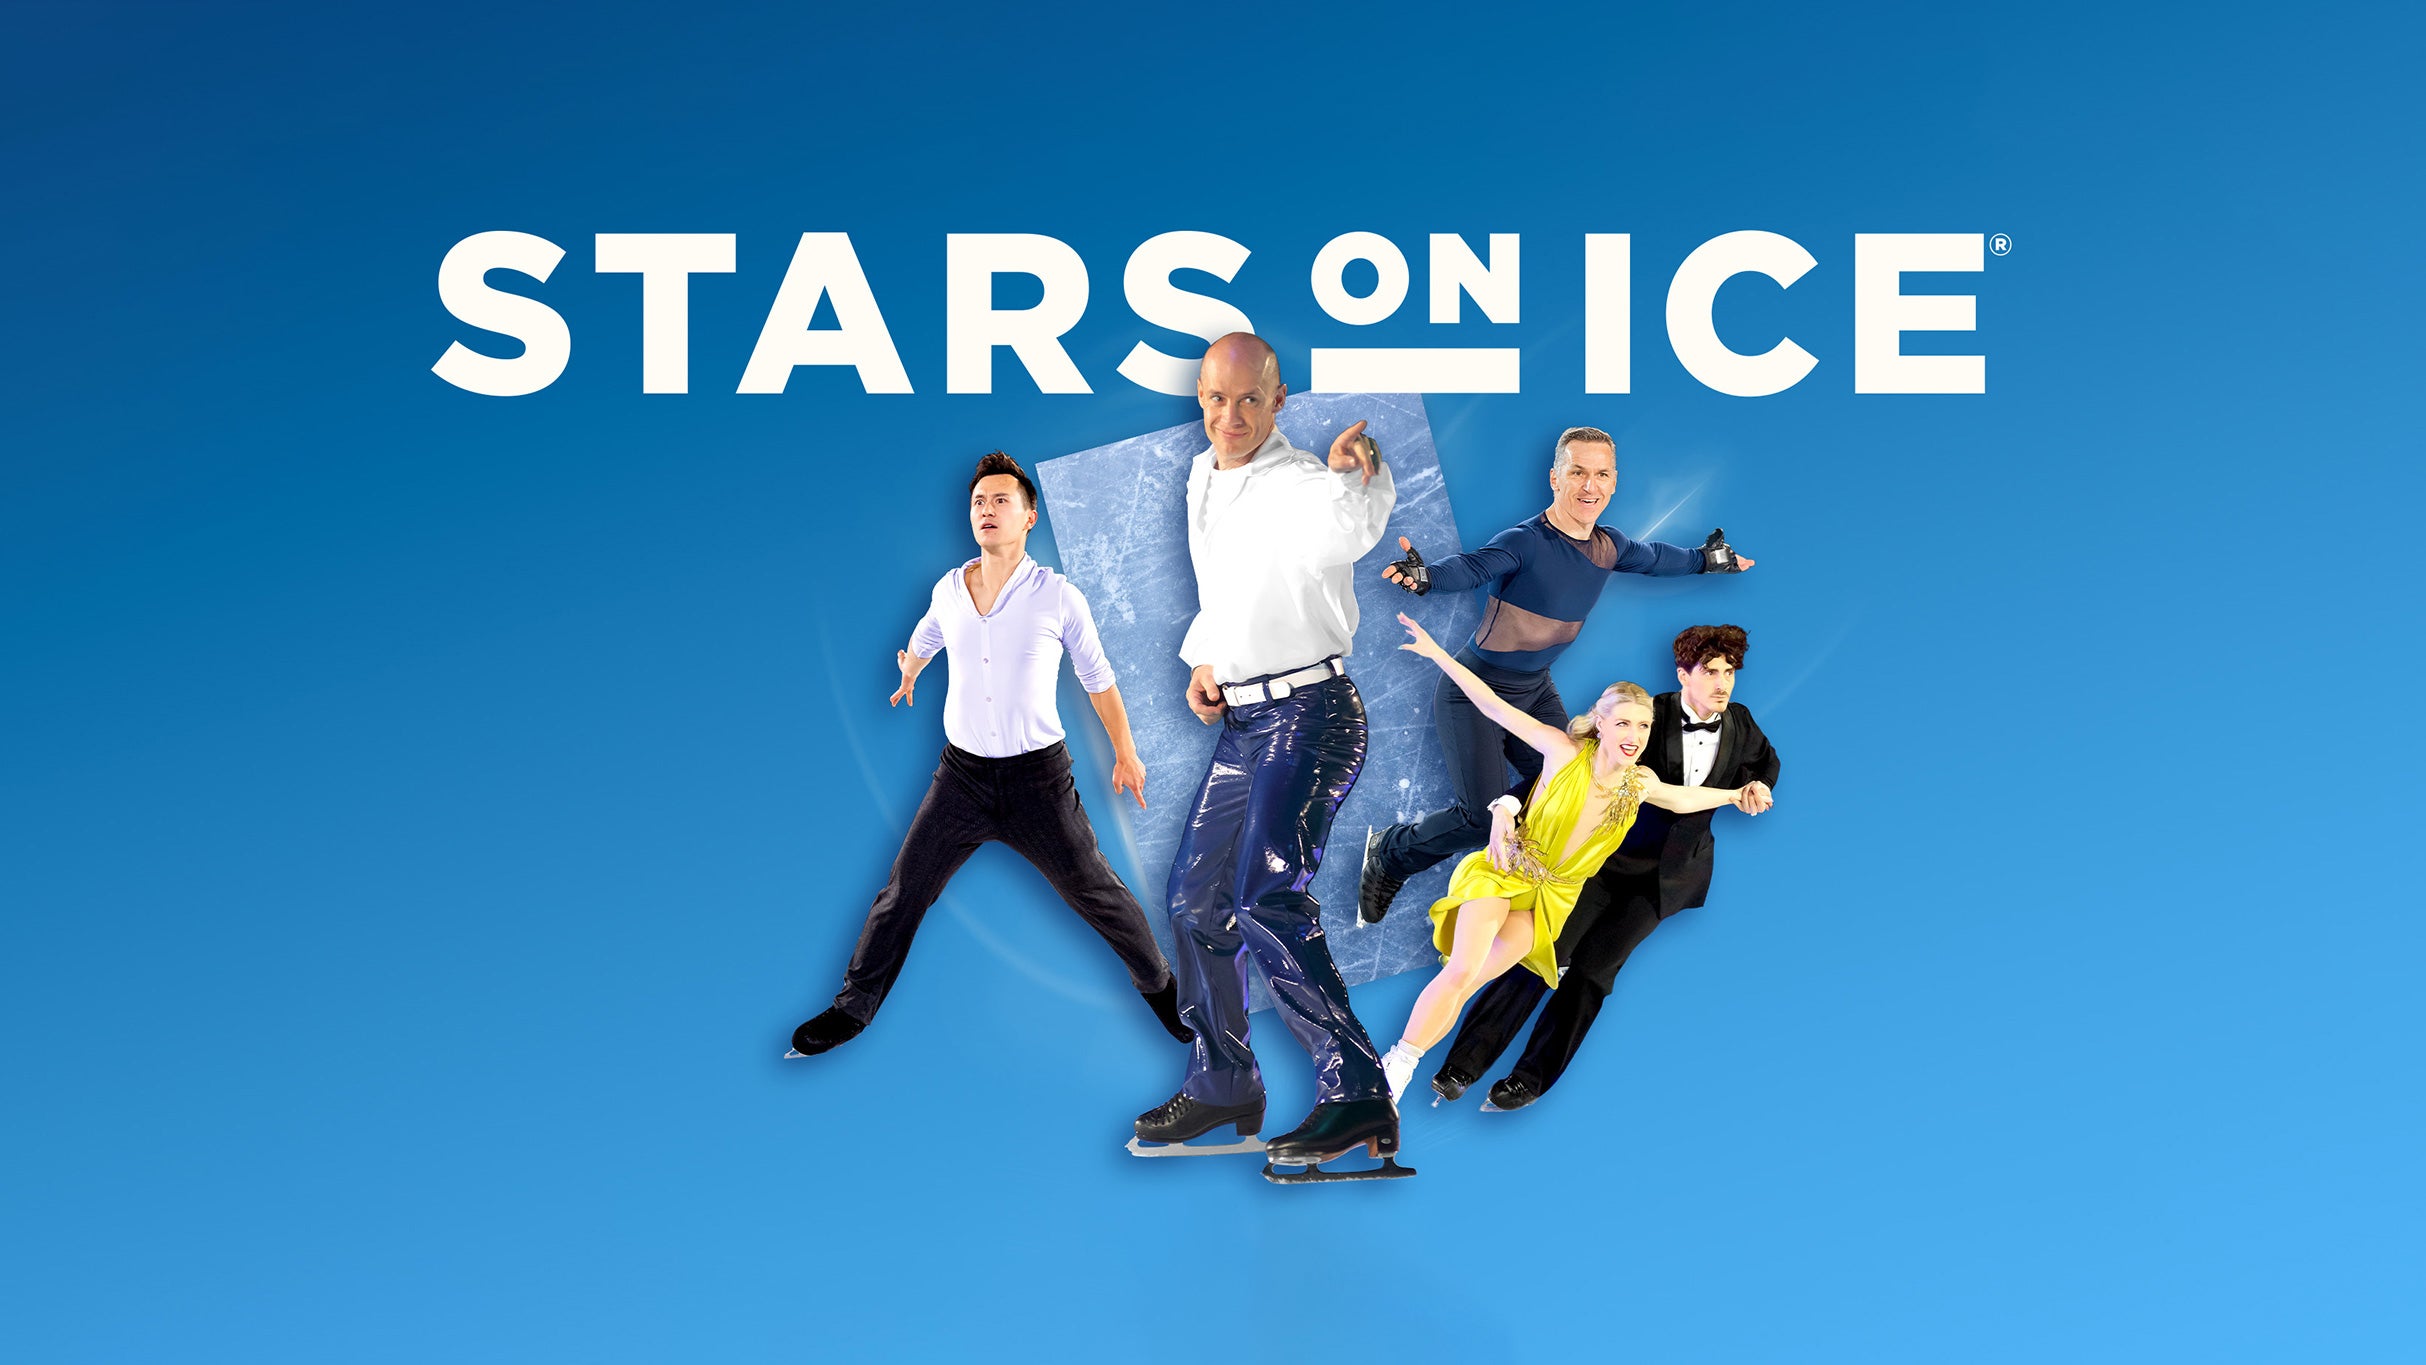 Stars on Ice - Canada in Toronto promo photo for Stars on Ice presale offer code